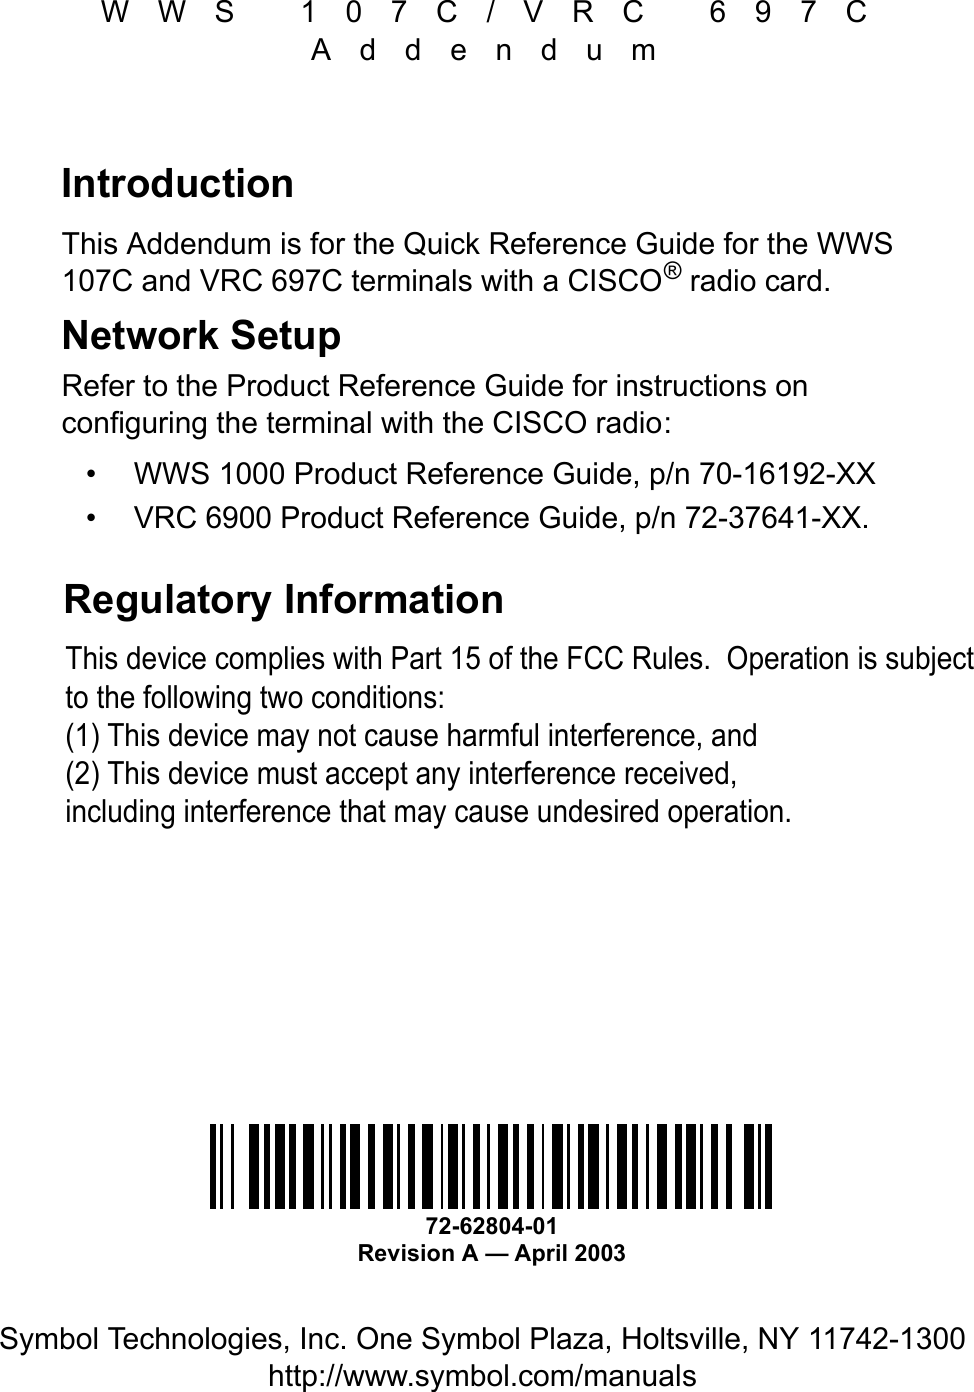 WWS 107C/VRC 697CAddendumSymbol Technologies, Inc. One Symbol Plaza, Holtsville, NY 11742-1300http://www.symbol.com/manualsIntroductionThis Addendum is for the Quick Reference Guide for the WWS 107C and VRC 697C terminals with a CISCO® radio card.Network SetupRefer to the Product Reference Guide for instructions on configuring the terminal with the CISCO radio:•WWS 1000 Product Reference Guide, p/n 70-16192-XX•VRC 6900 Product Reference Guide, p/n 72-37641-XX.Regulatory Information 72-62804-01Revision A — April 2003This device complies with Part 15 of the FCC Rules.  Operation is subject to the following two conditions:(1) This device may not cause harmful interference, and(2) This device must accept any interference received, including interference that may cause undesired operation.